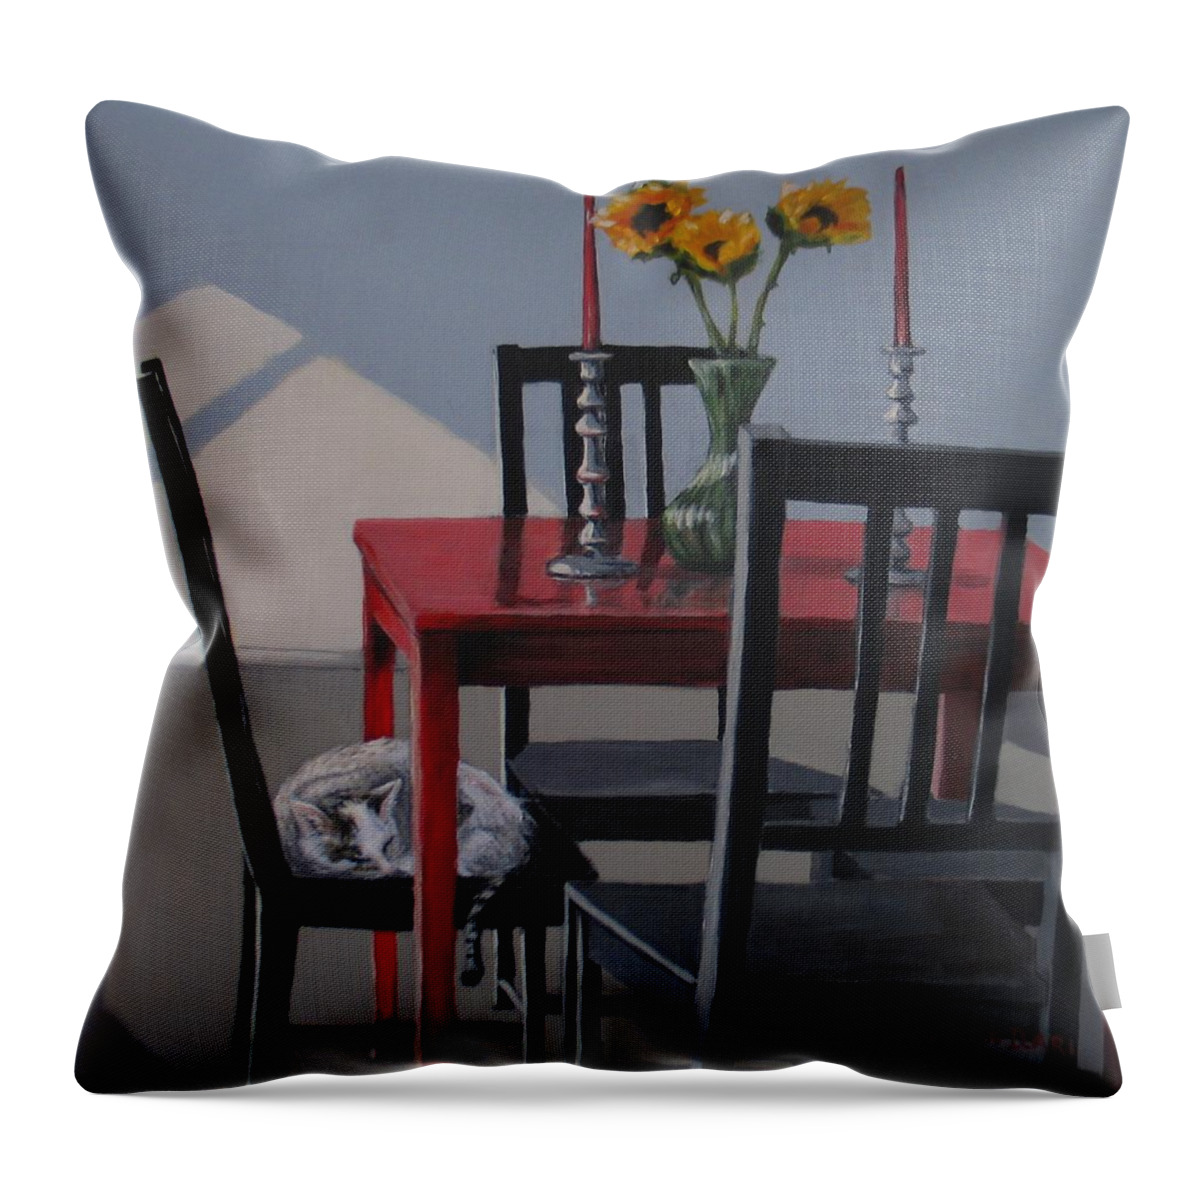 Interiors Throw Pillow featuring the painting Its a New Day by Karen Ilari